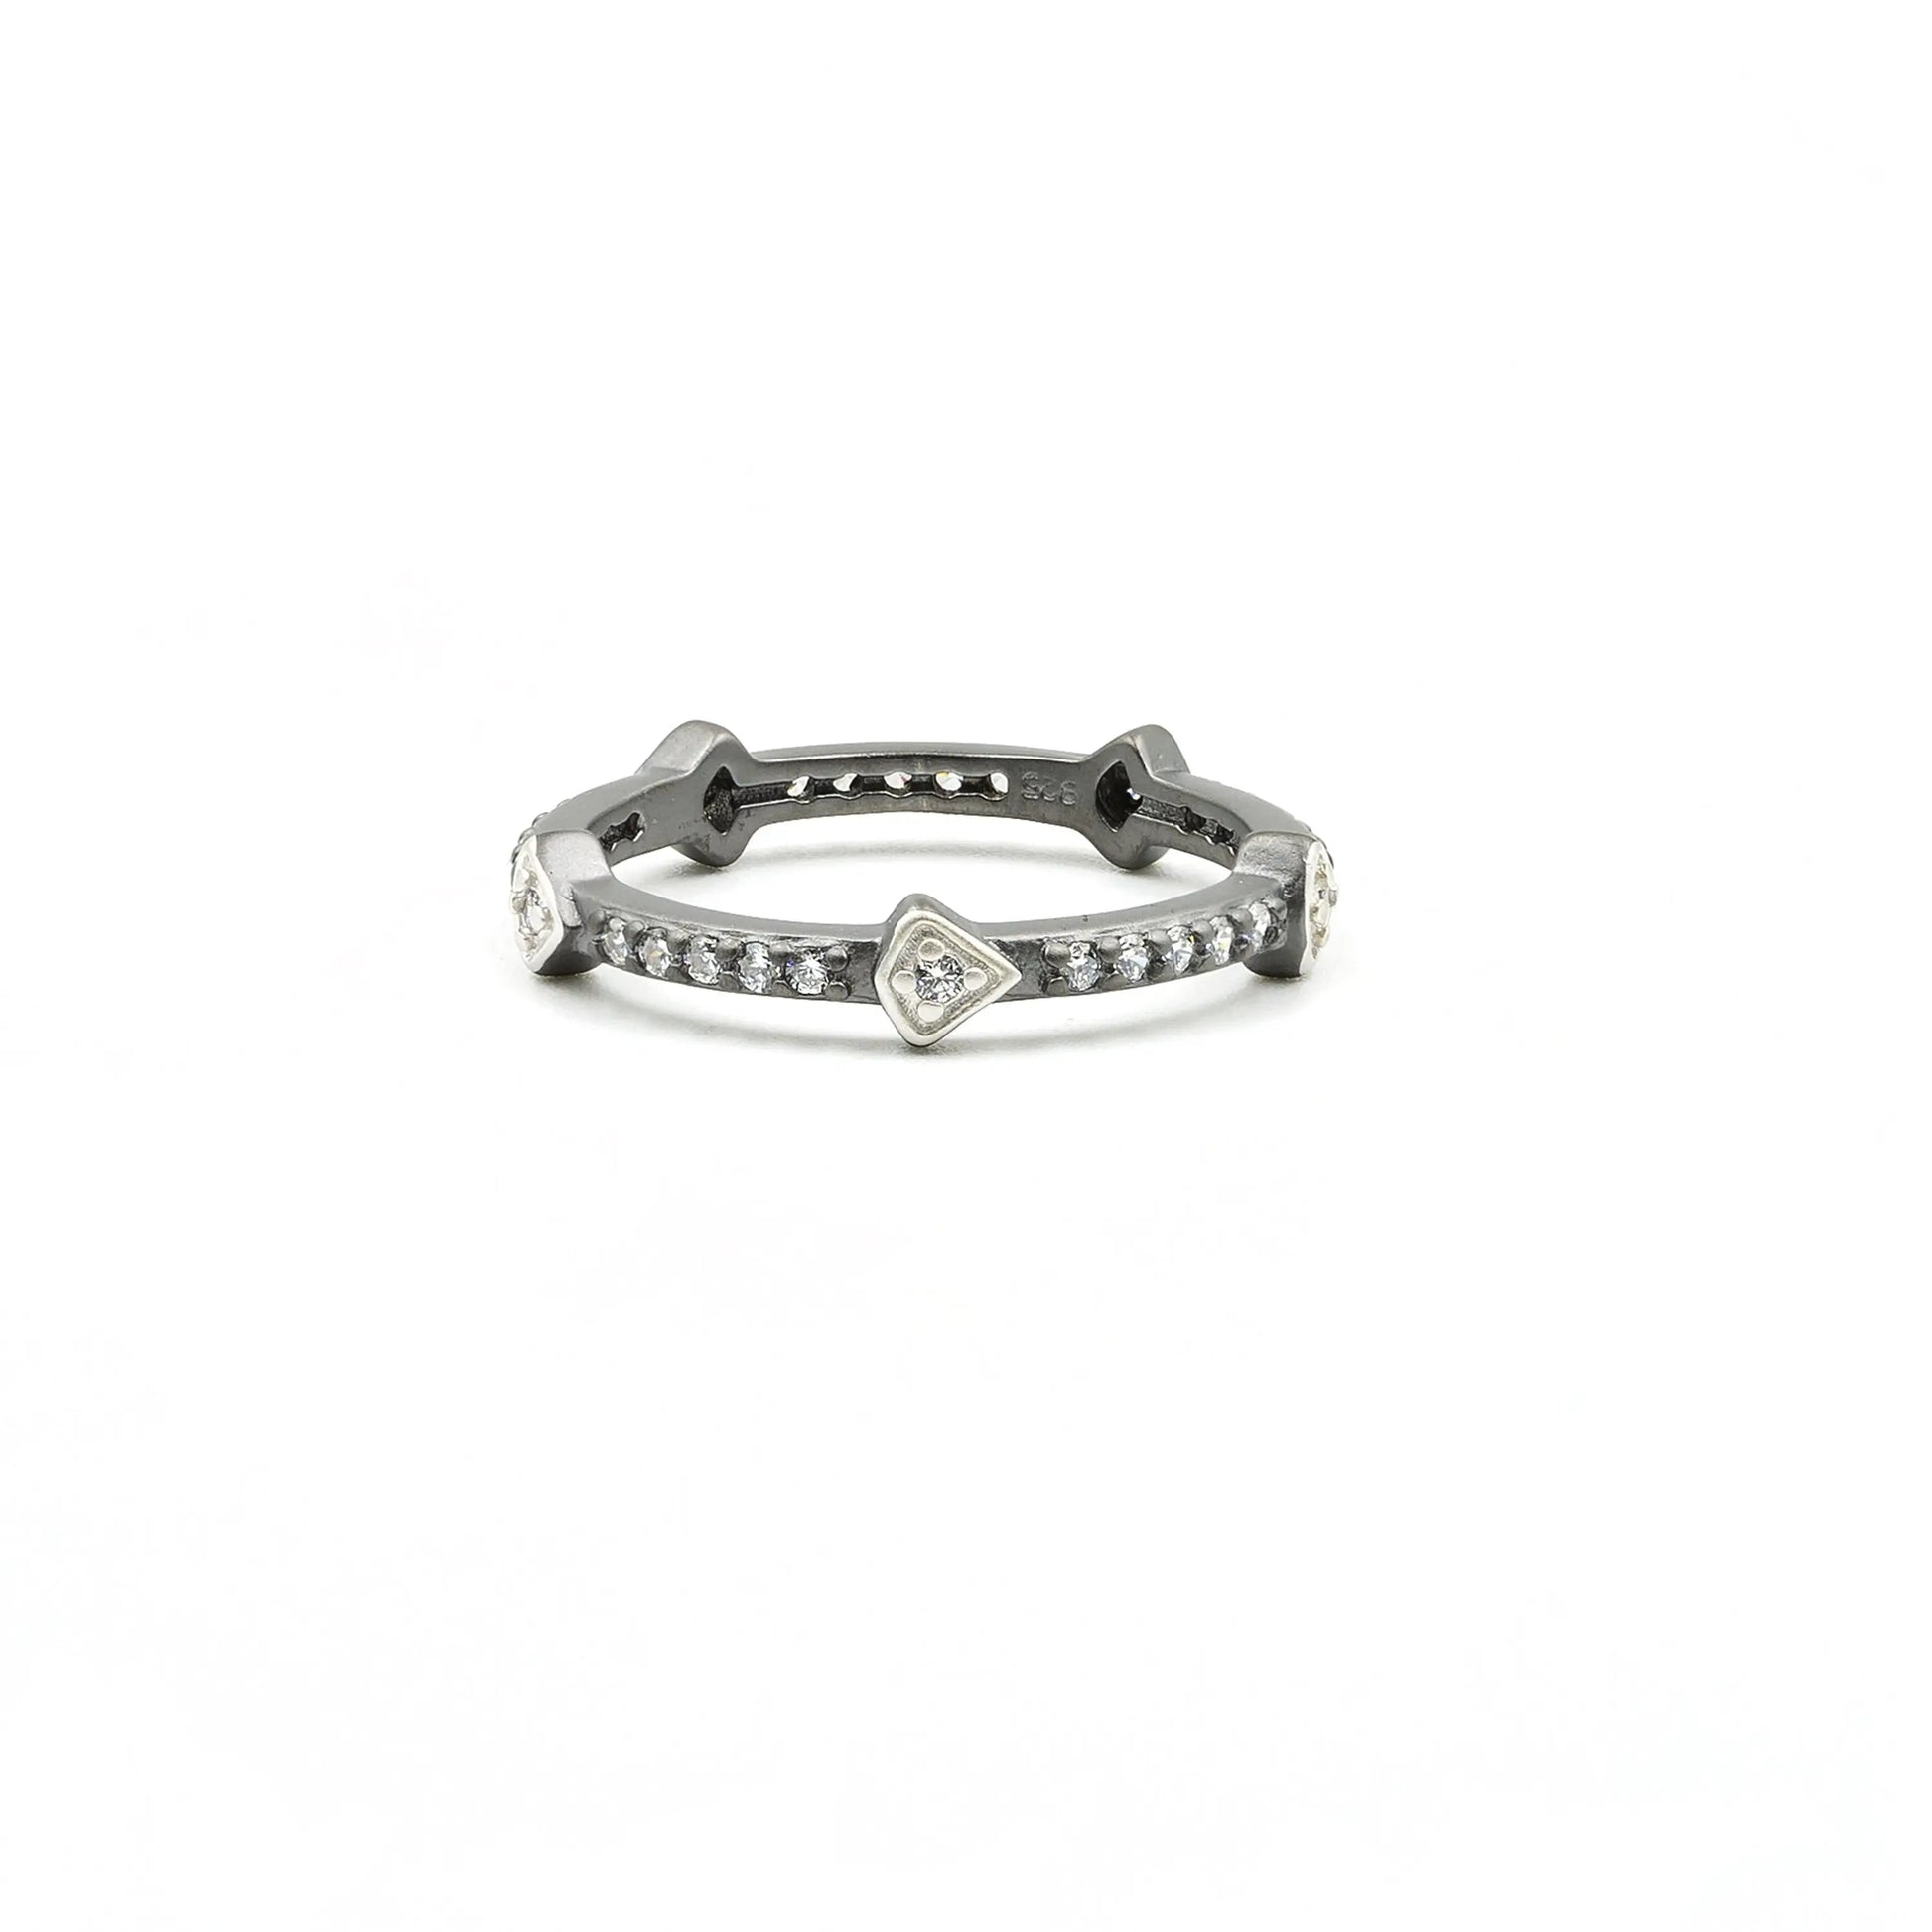 SilverBlackReverse9 Arrow Station Ring RINGS FOR STACKING RING